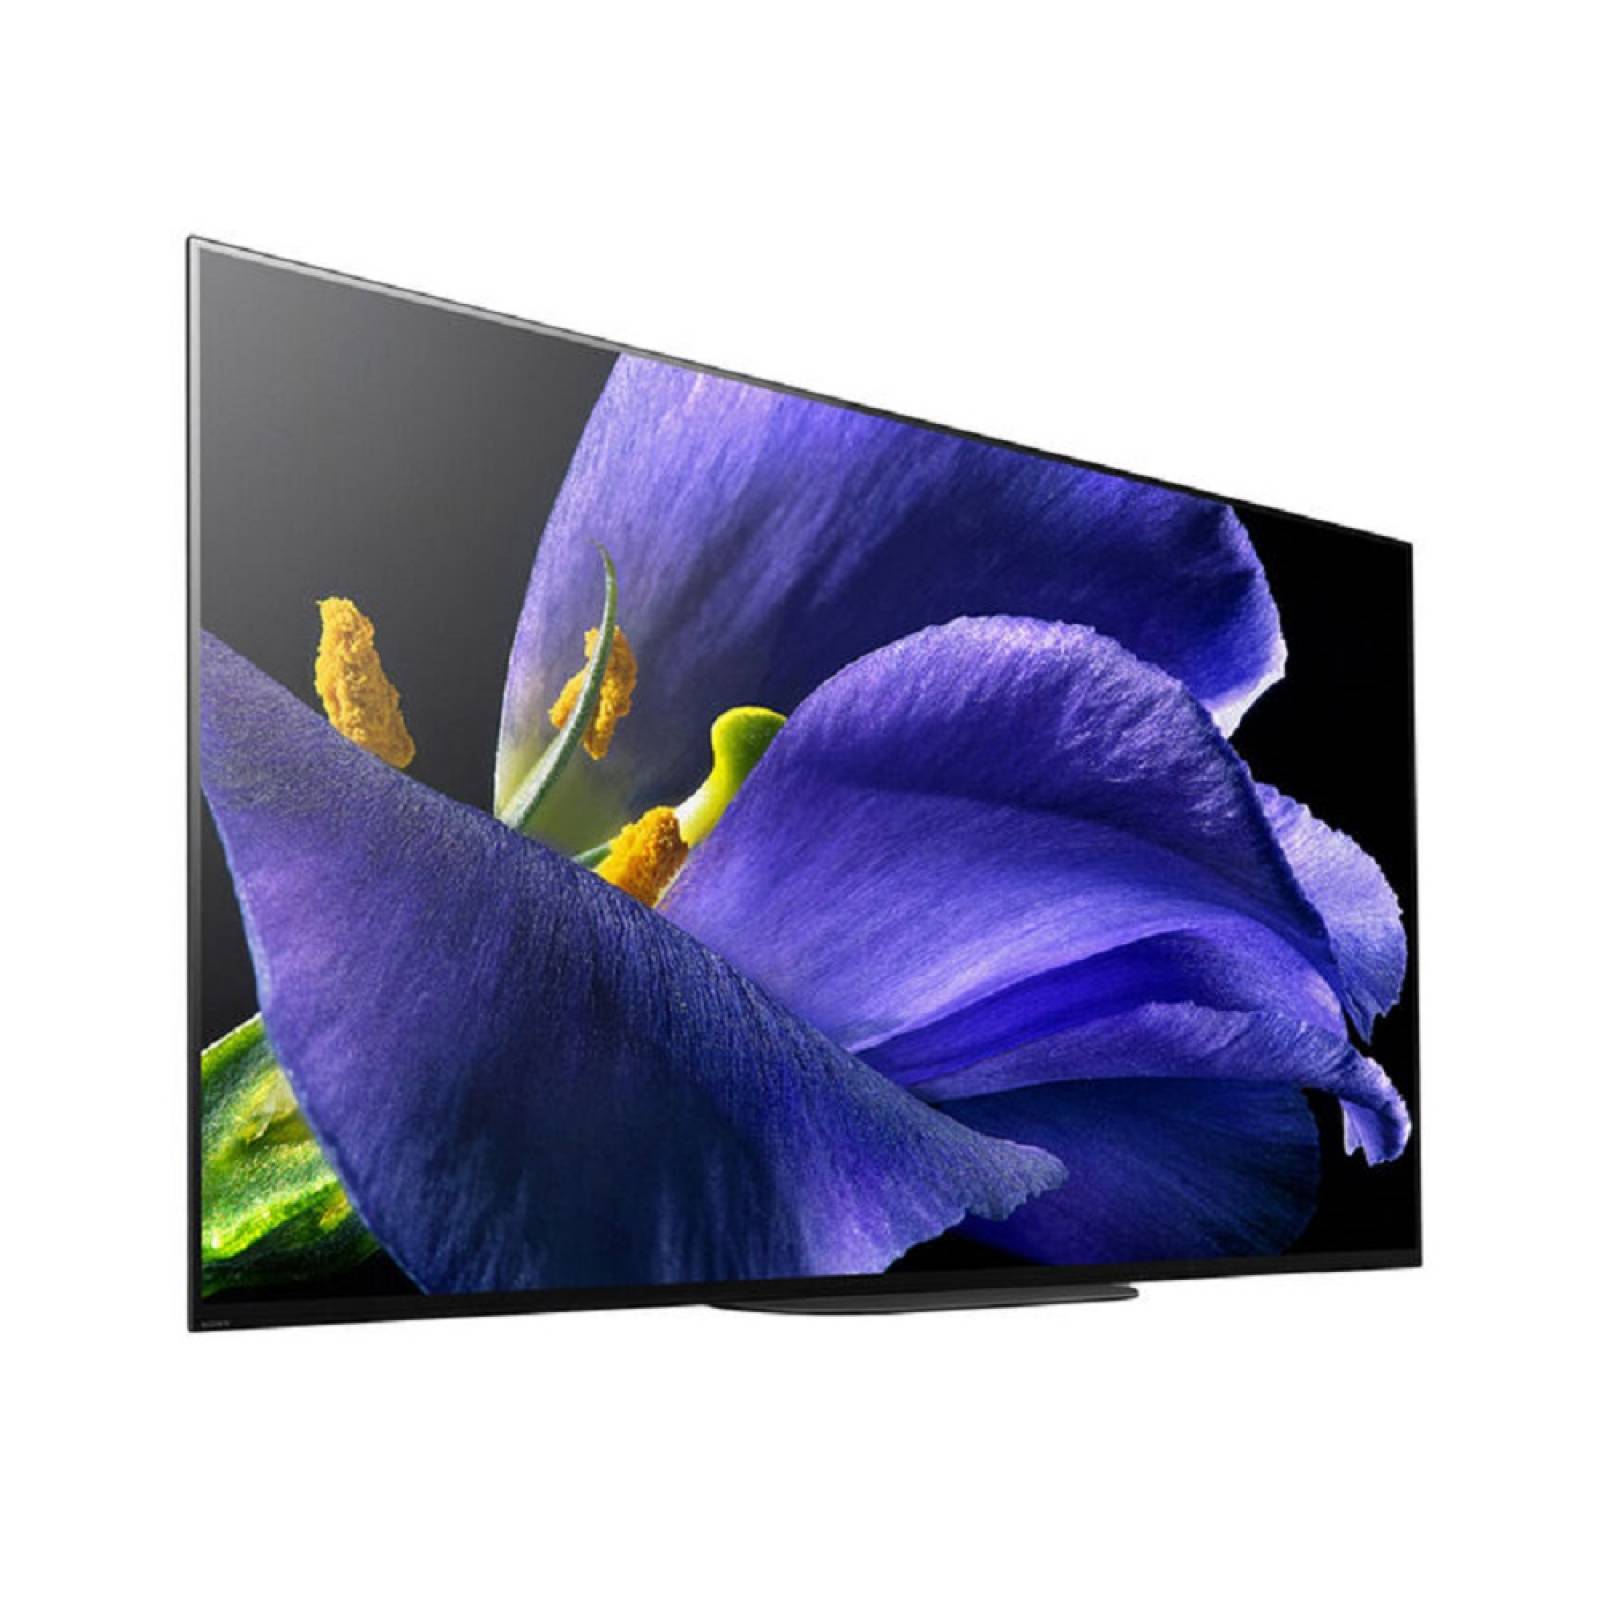 Smart TV Sony OLED 4K UHD HDR10 Trilumius XBR-65A9G